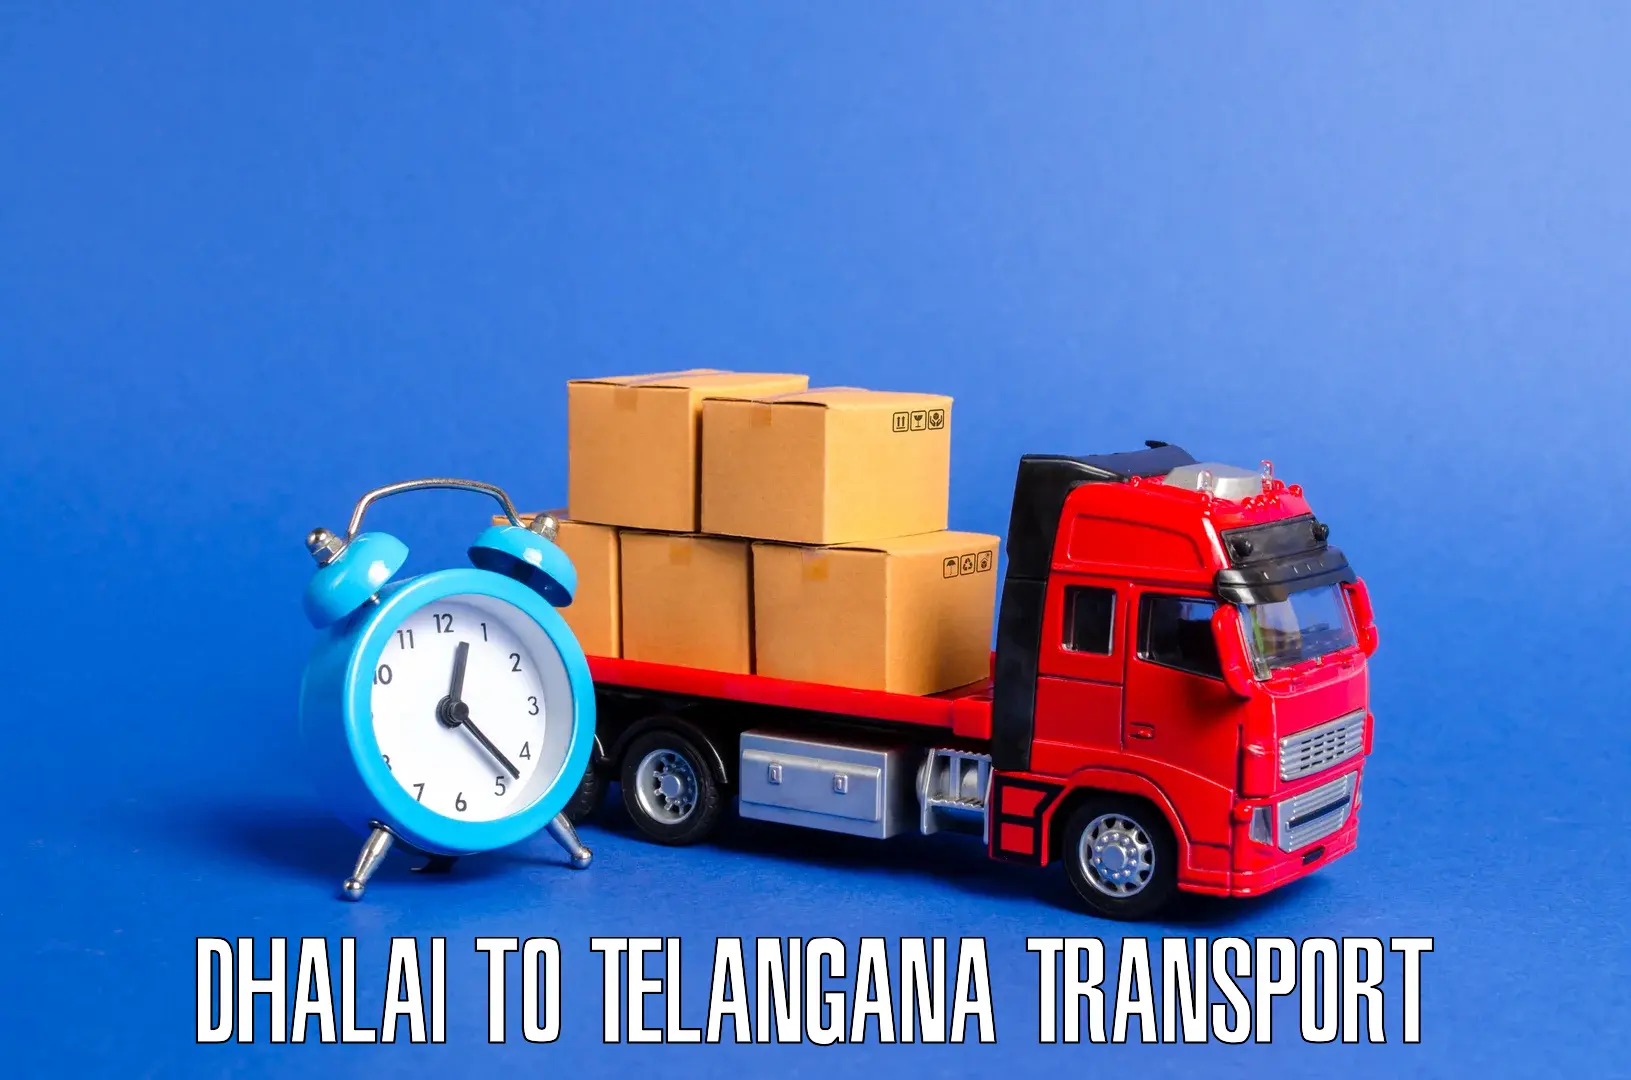 Two wheeler parcel service in Dhalai to Sultanabad